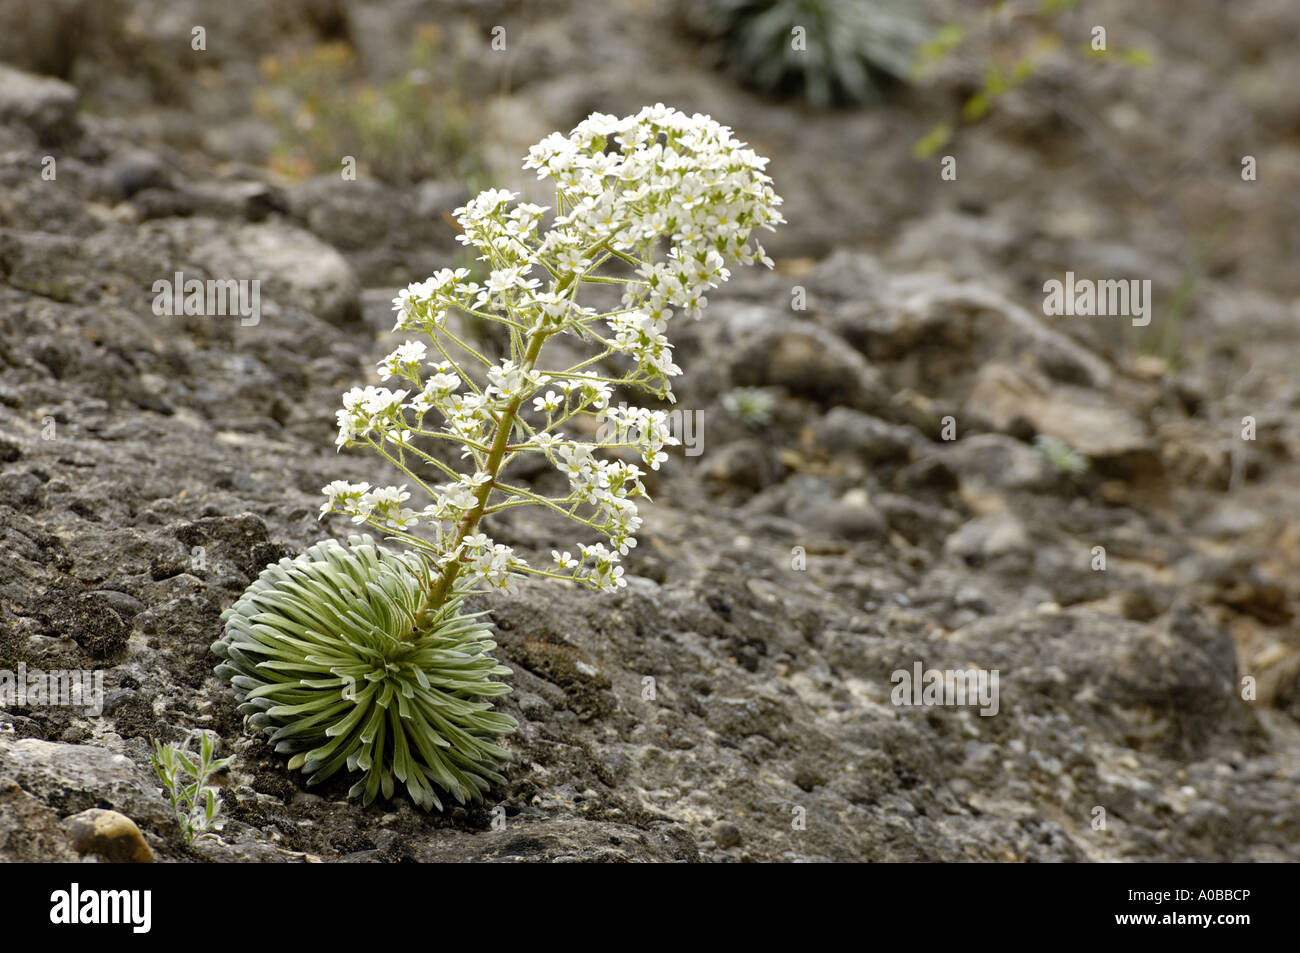 Saxifraga longifolia (Saxifraga longifolia), flowering on a rock wall, Spain, Pyrenaeen Stock Photo